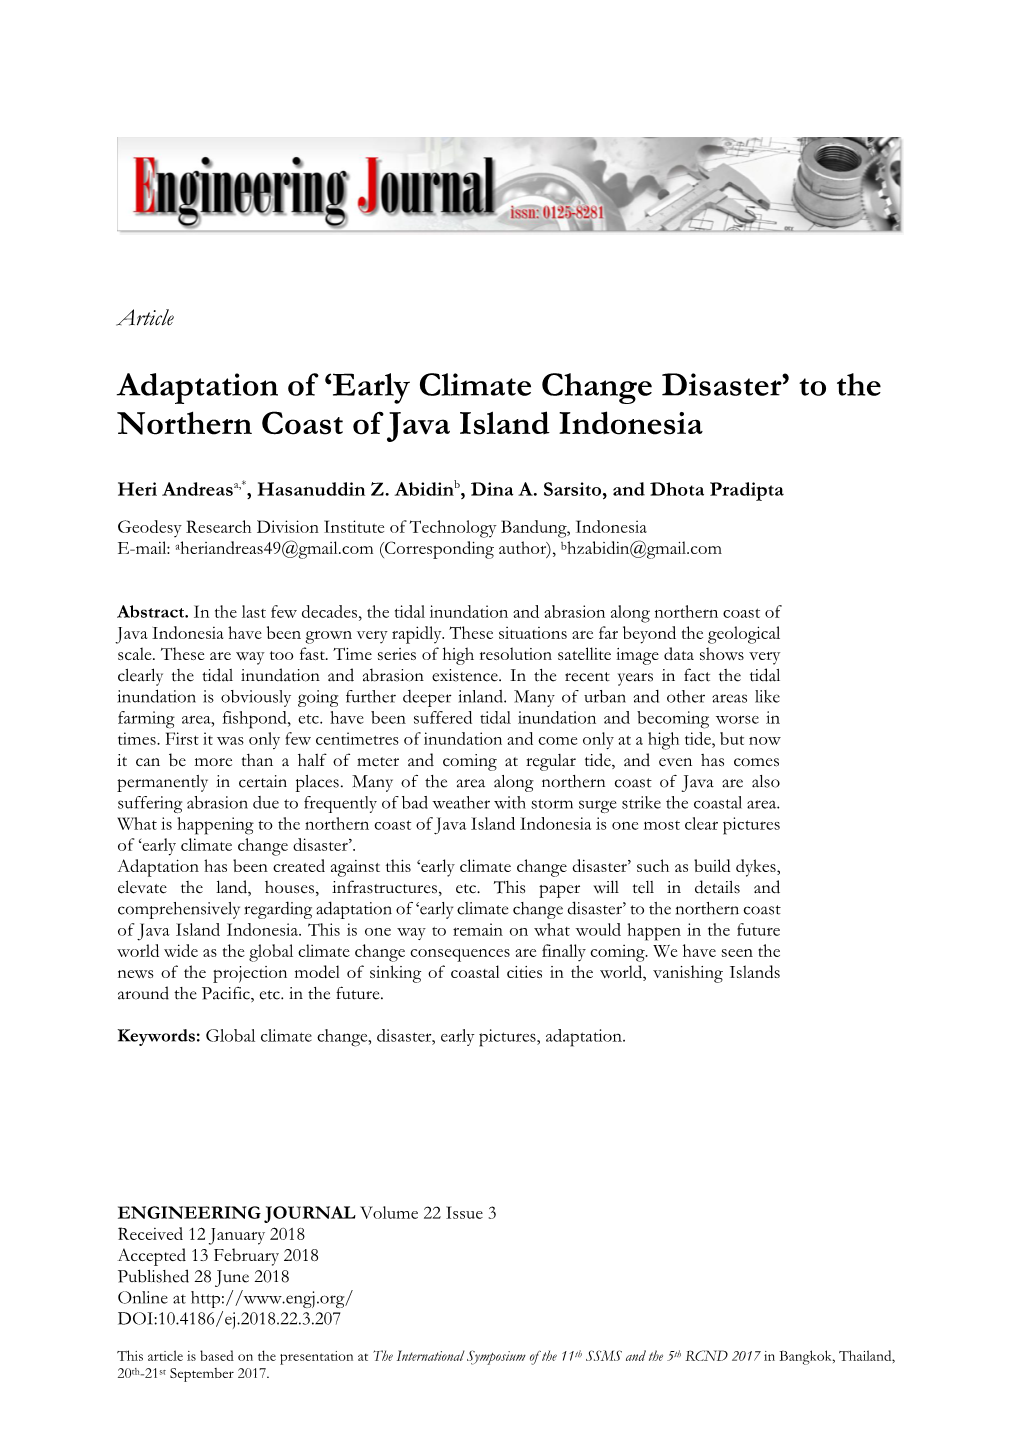 'Early Climate Change Disaster' to the Northern Coast of Java Island